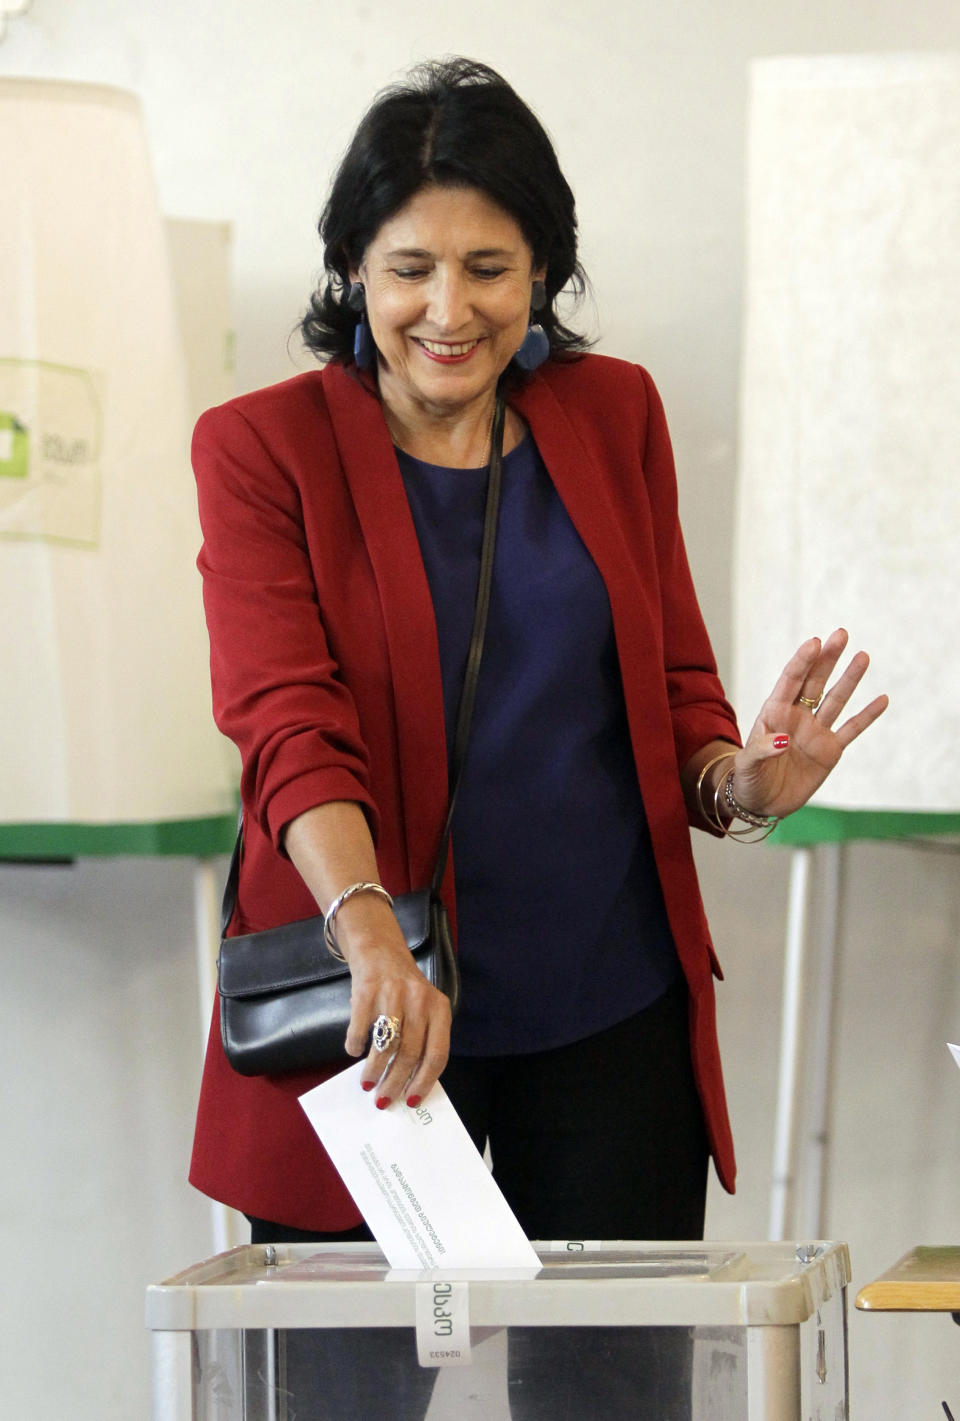 Salome Zurabishvili, former Georgian Foreign minister and presidential candidate from the European Georgia Party, casts her ballot at the polling station in Tbilisi, Georgia, Sunday, Oct. 28, 2018 . Voters in Georgia are choosing a new president for the former Soviet republic, the last time the president will be elected by direct ballot. (AP Photo/Shakh Aivazov)